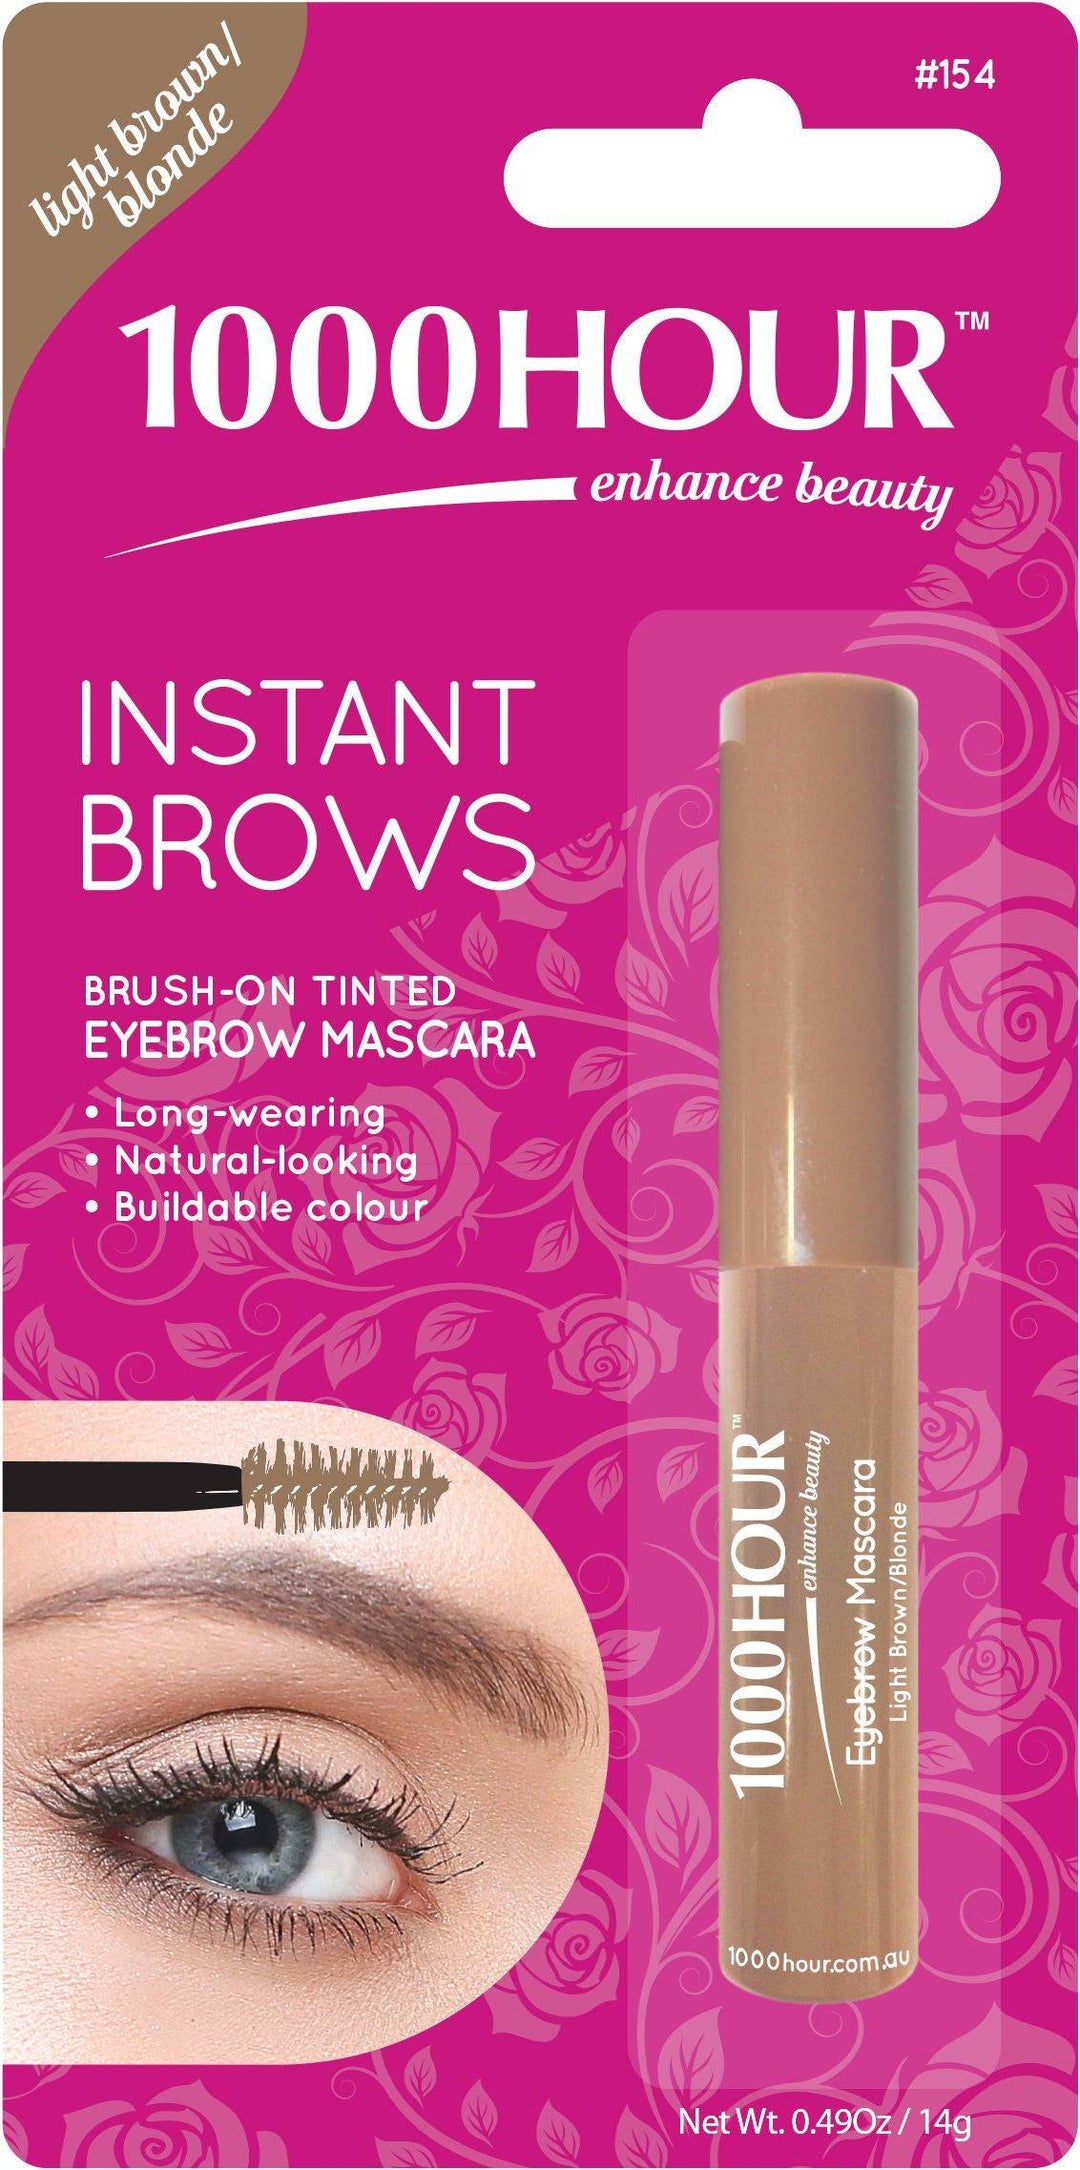 1000HOUR INSTANT BROW MASCARA - LIGHT BROWN/BLONDE - Pretty Woman NYC